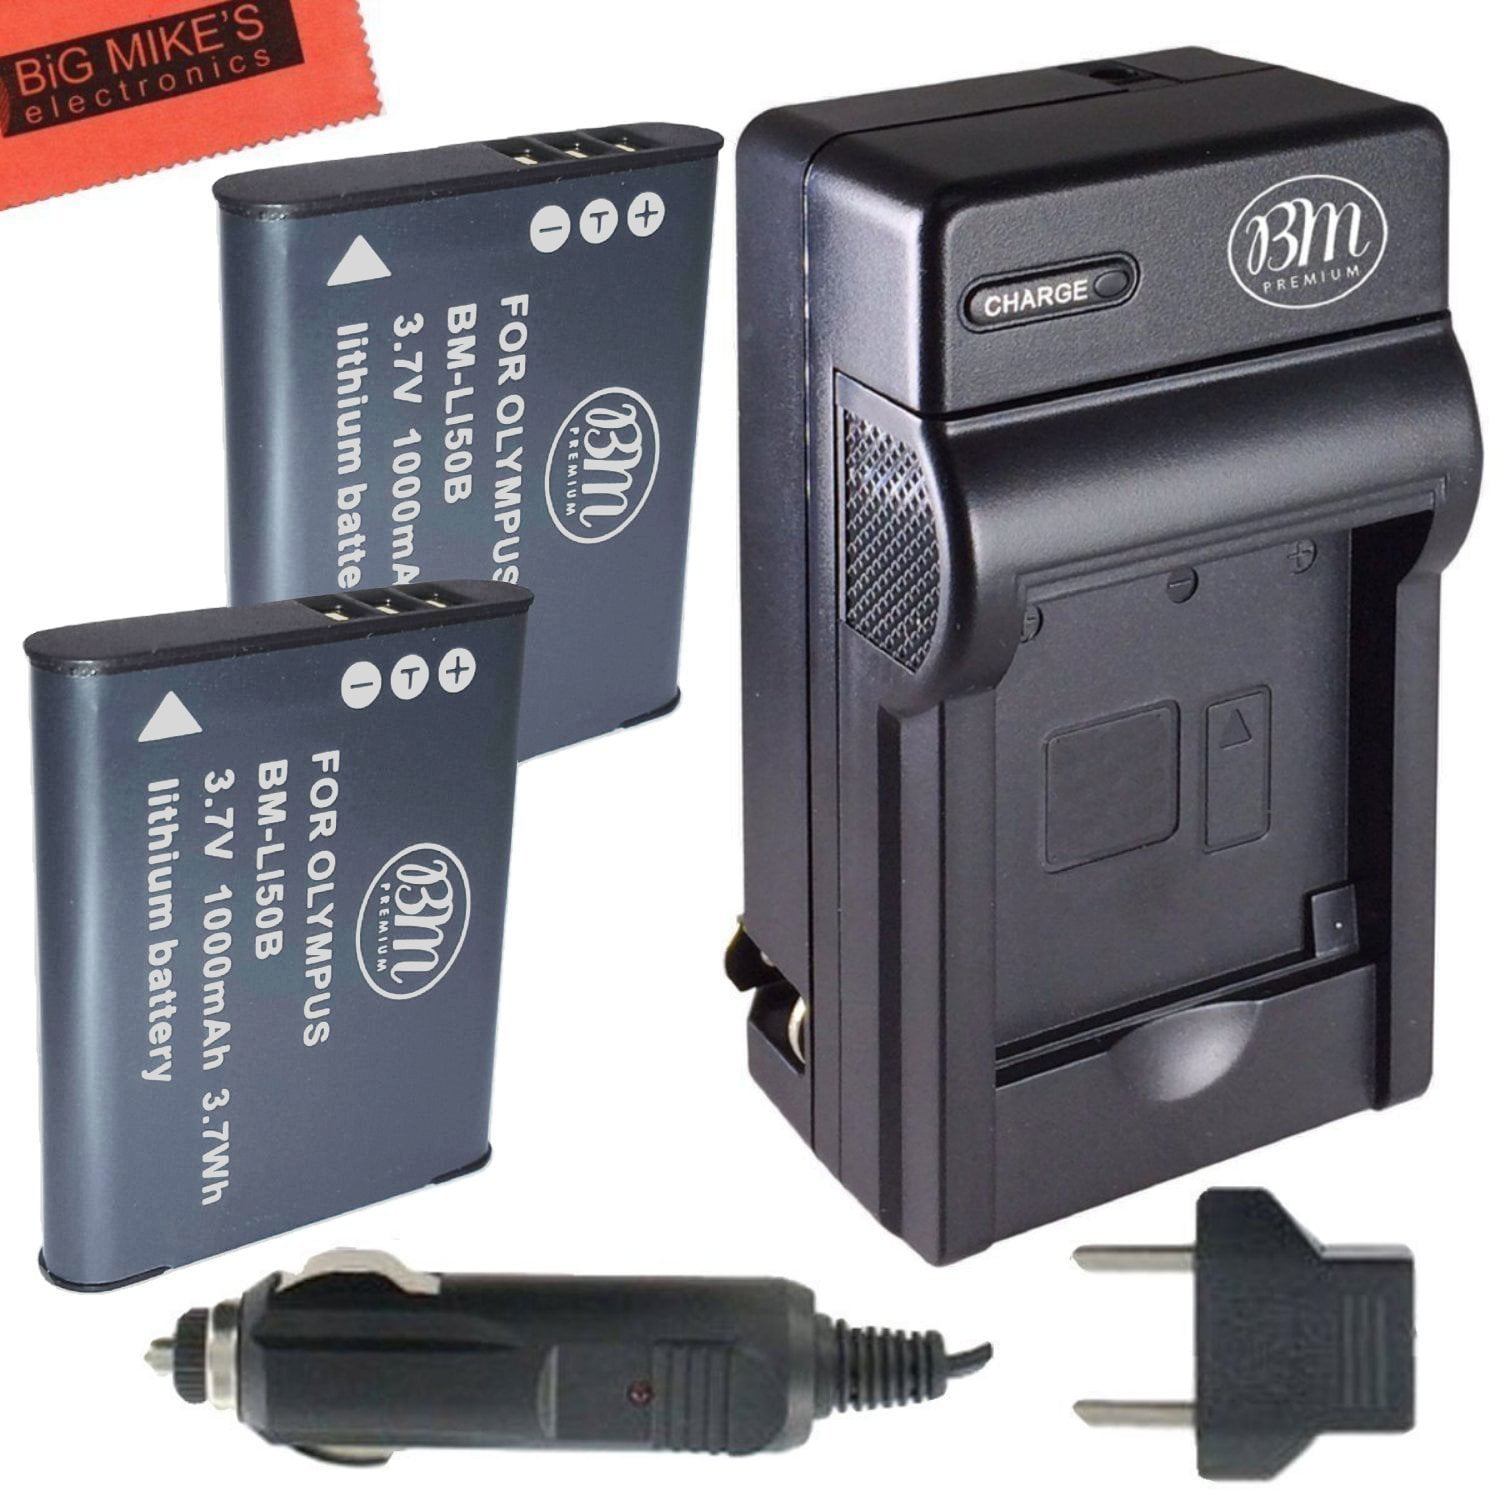 2 Battery and USB Travel Charger for Olympus Stylus Tough TG-850 Tough TG-870 Digital Camera Tough TG-860